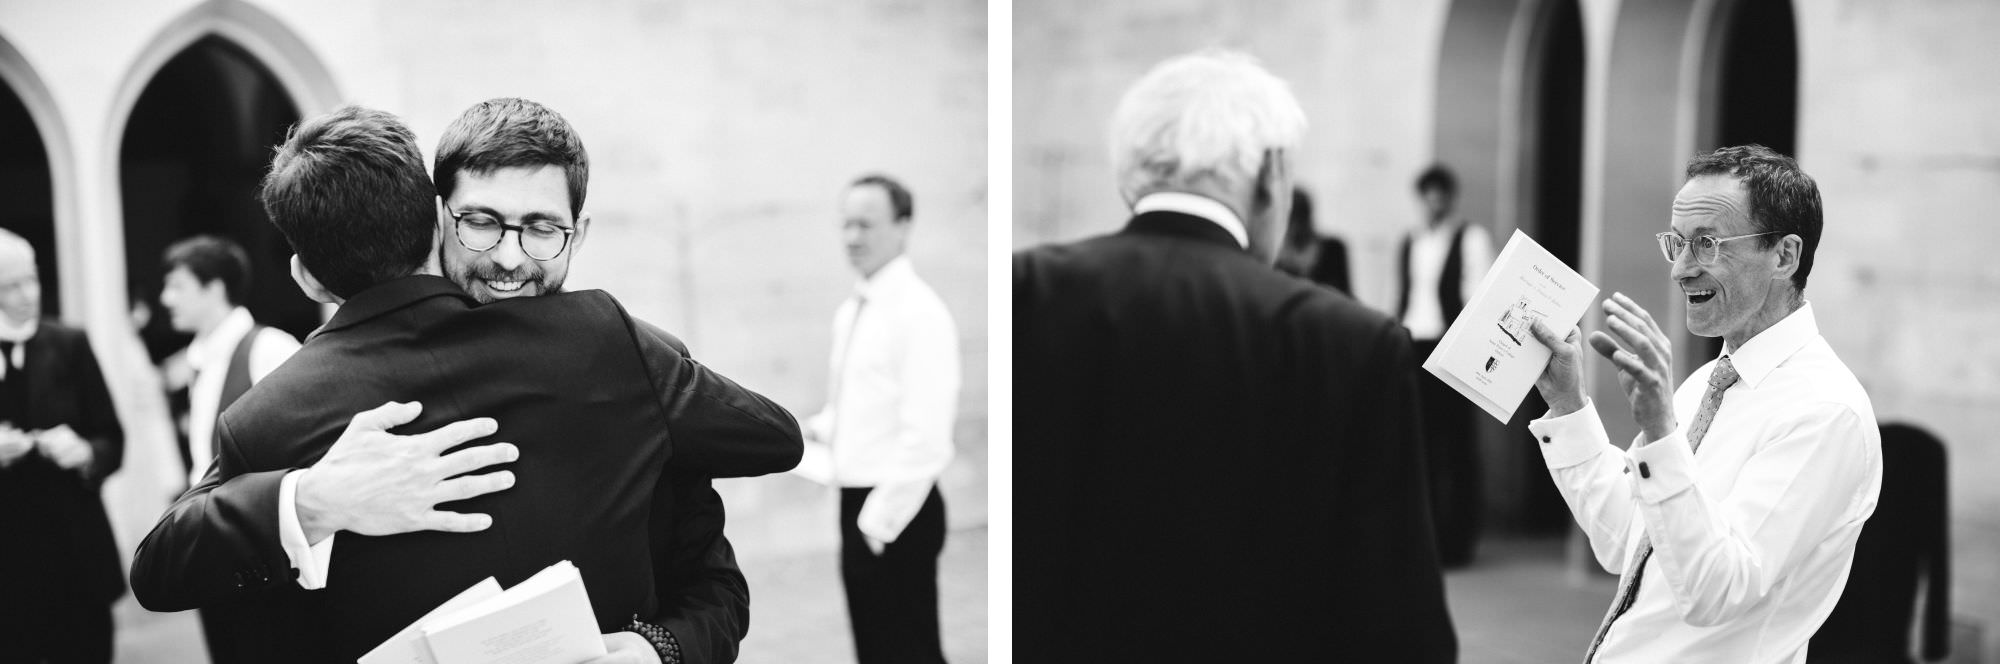 groom hugs and friend gestures wildly with hands